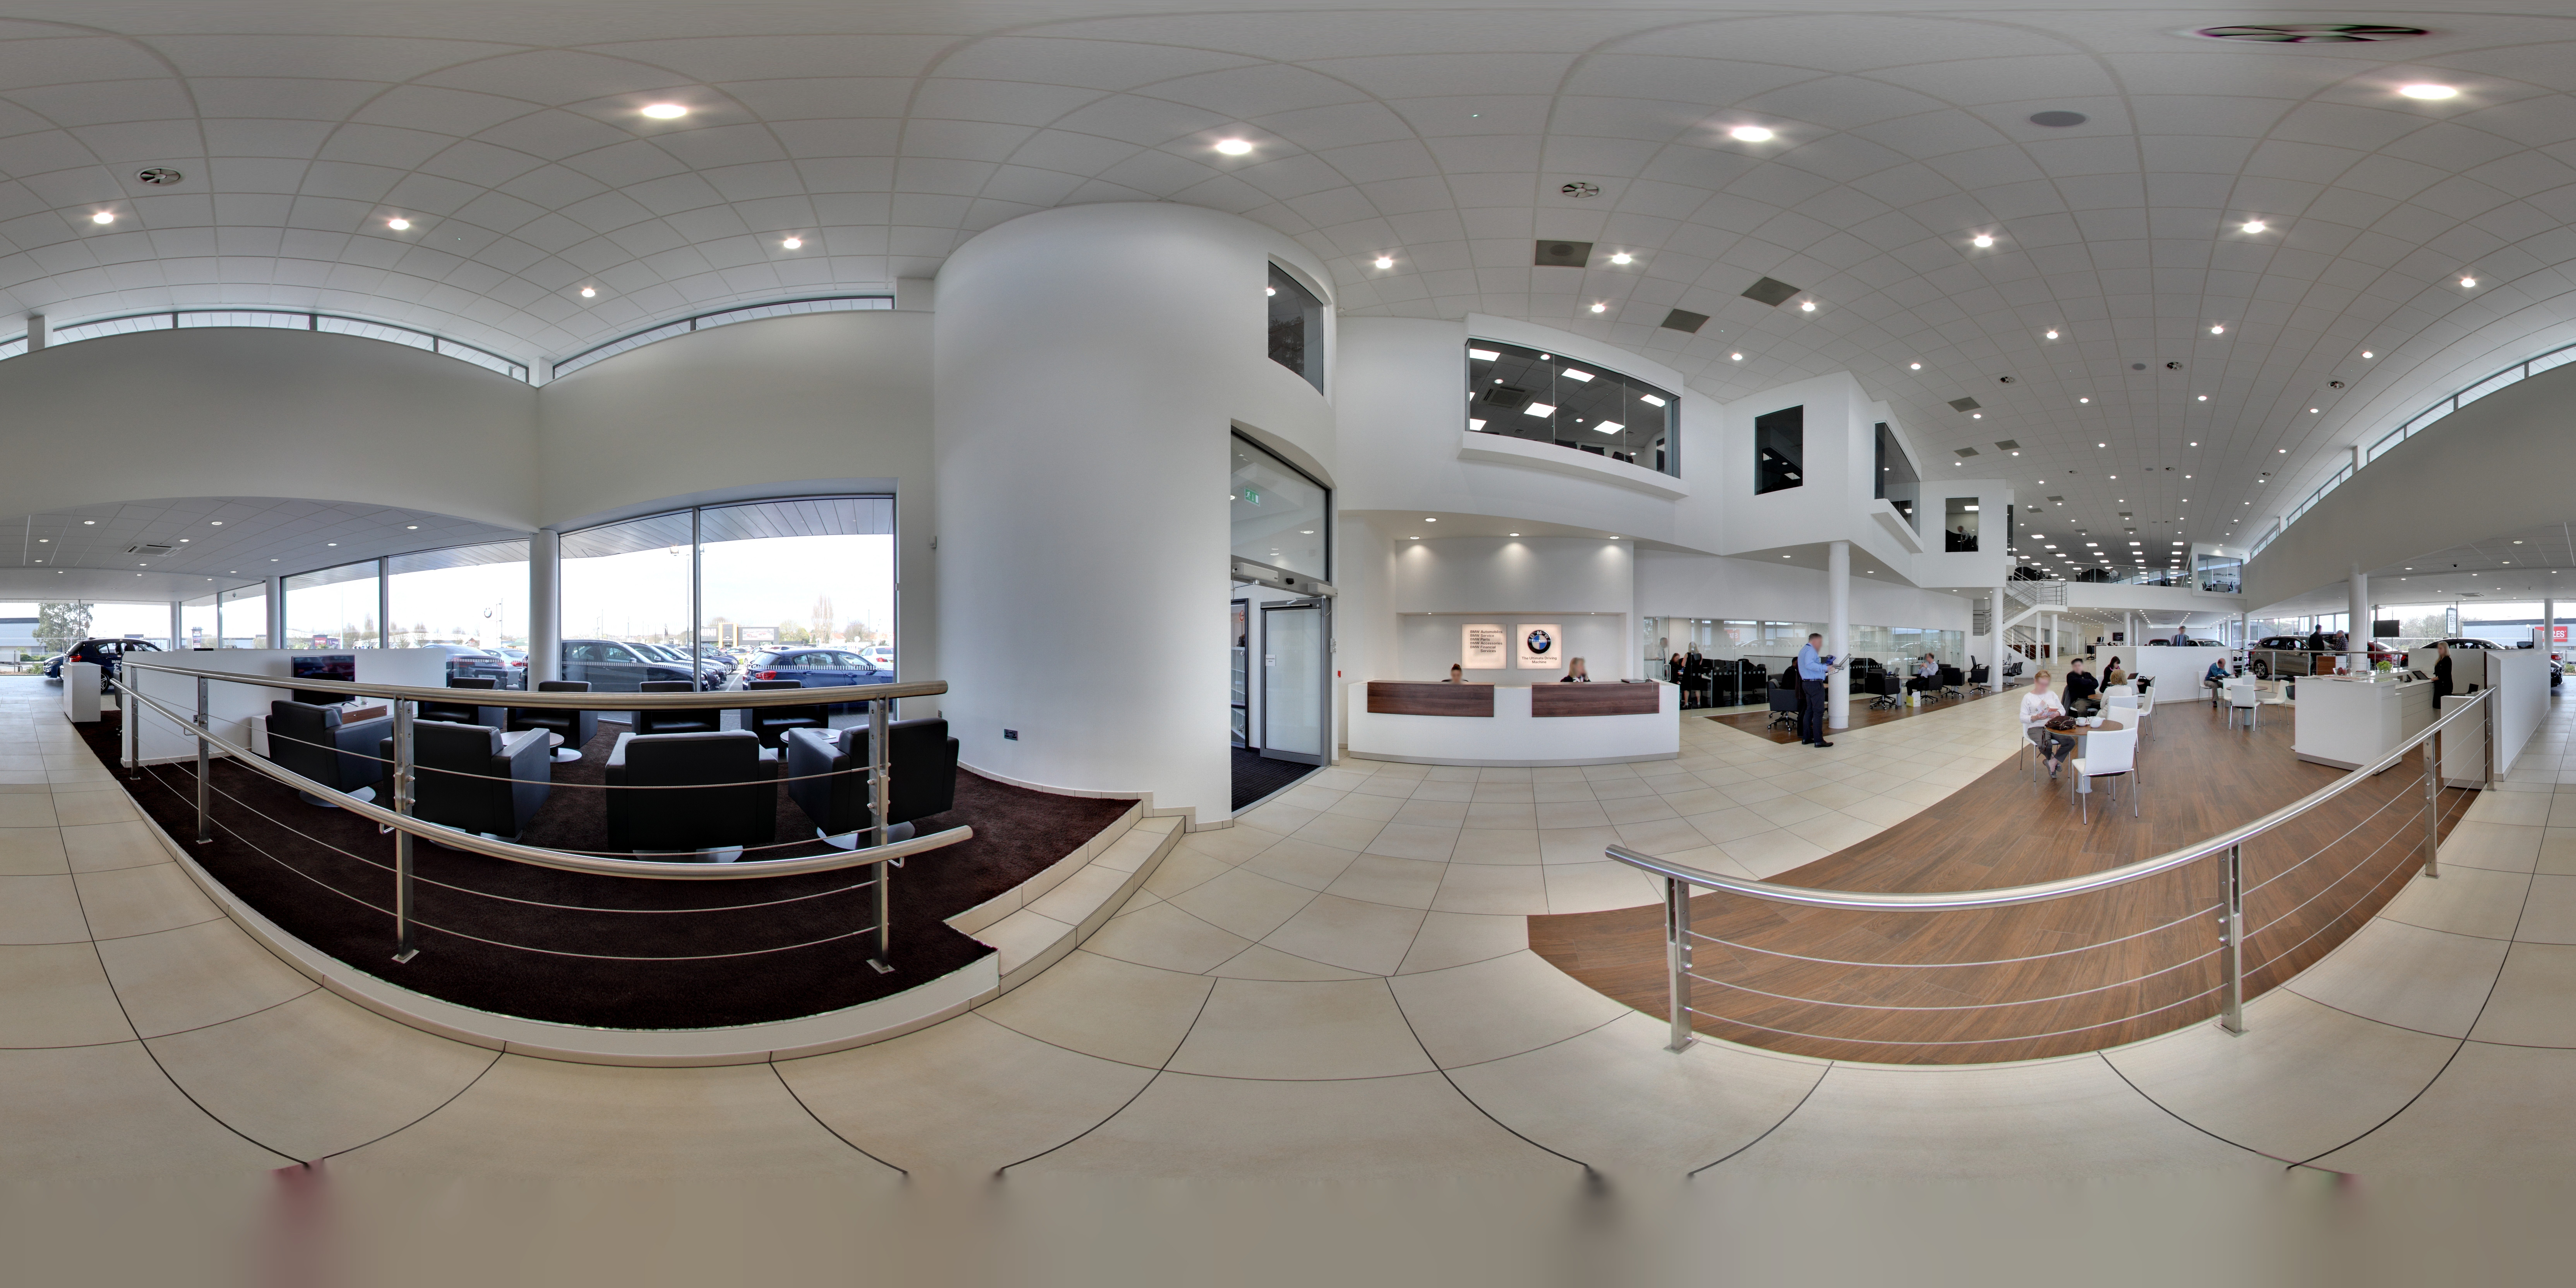 Images Sytner Coventry BMW